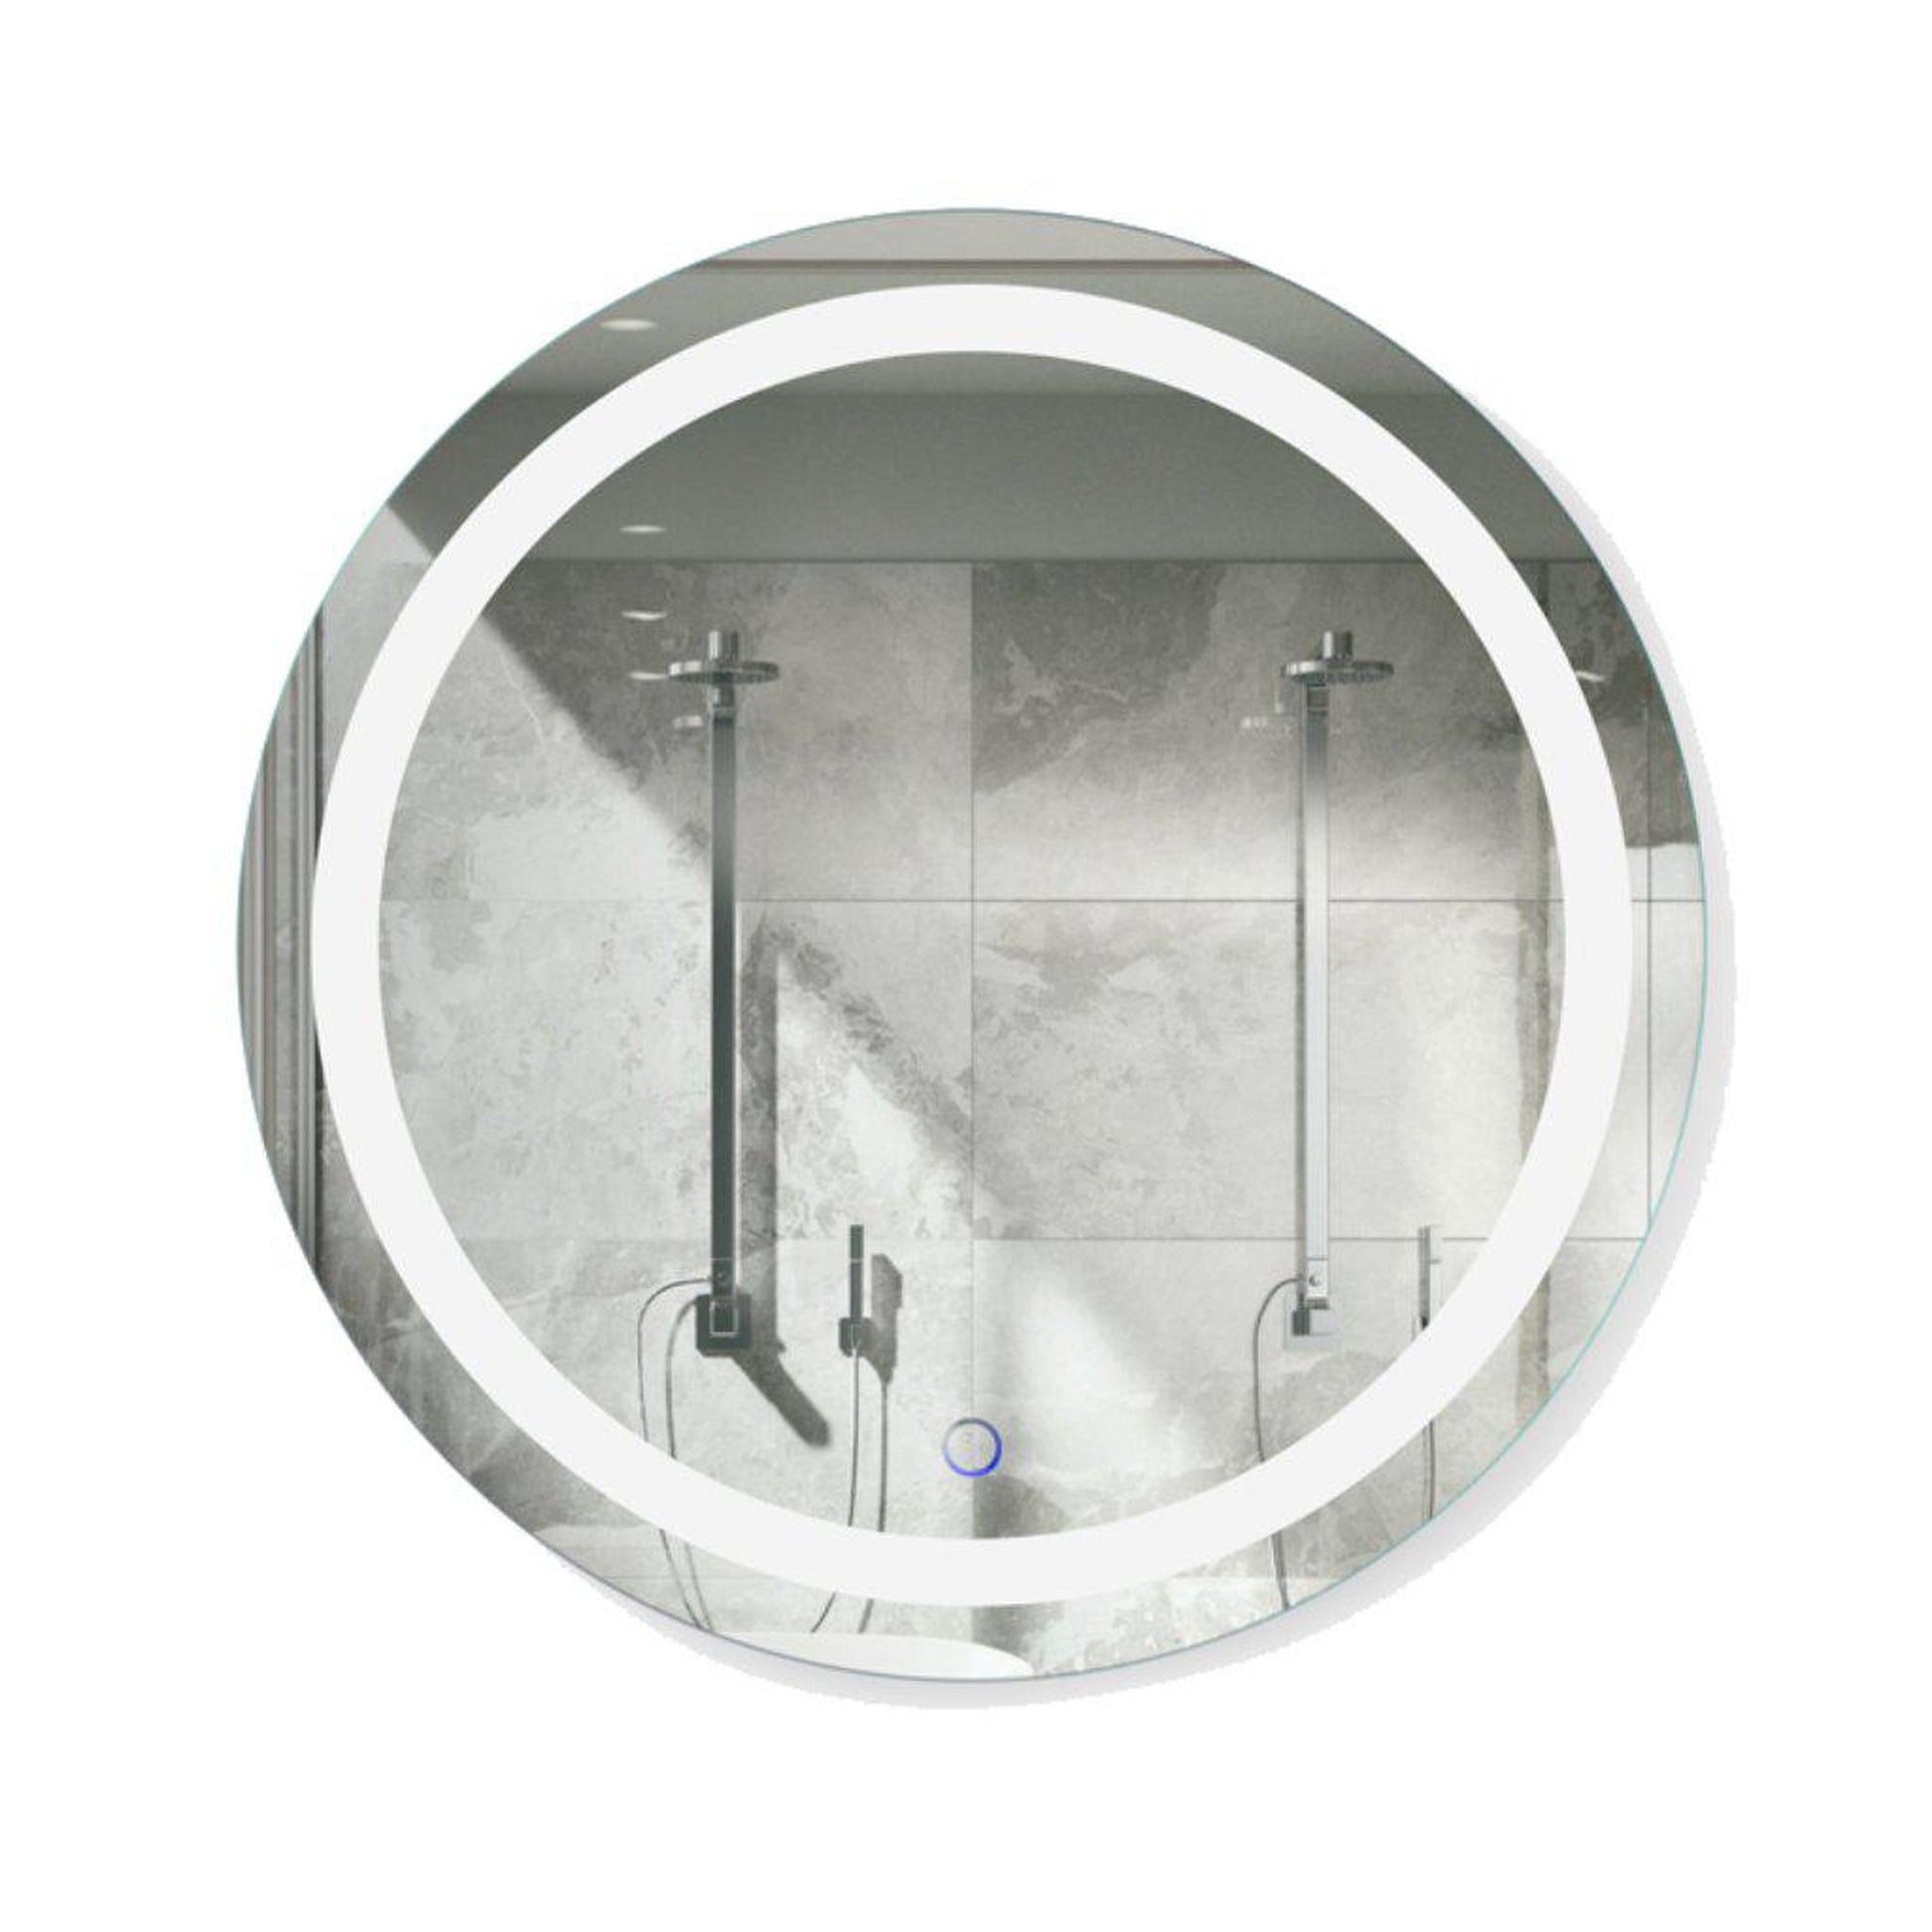 Krugg Reflections Icon 24" x 24" 5000K Round Wall-Mounted Illuminated Silver Backed LED Mirror With Built-in Defogger and Touch Sensor On/Off Built-in Dimmer